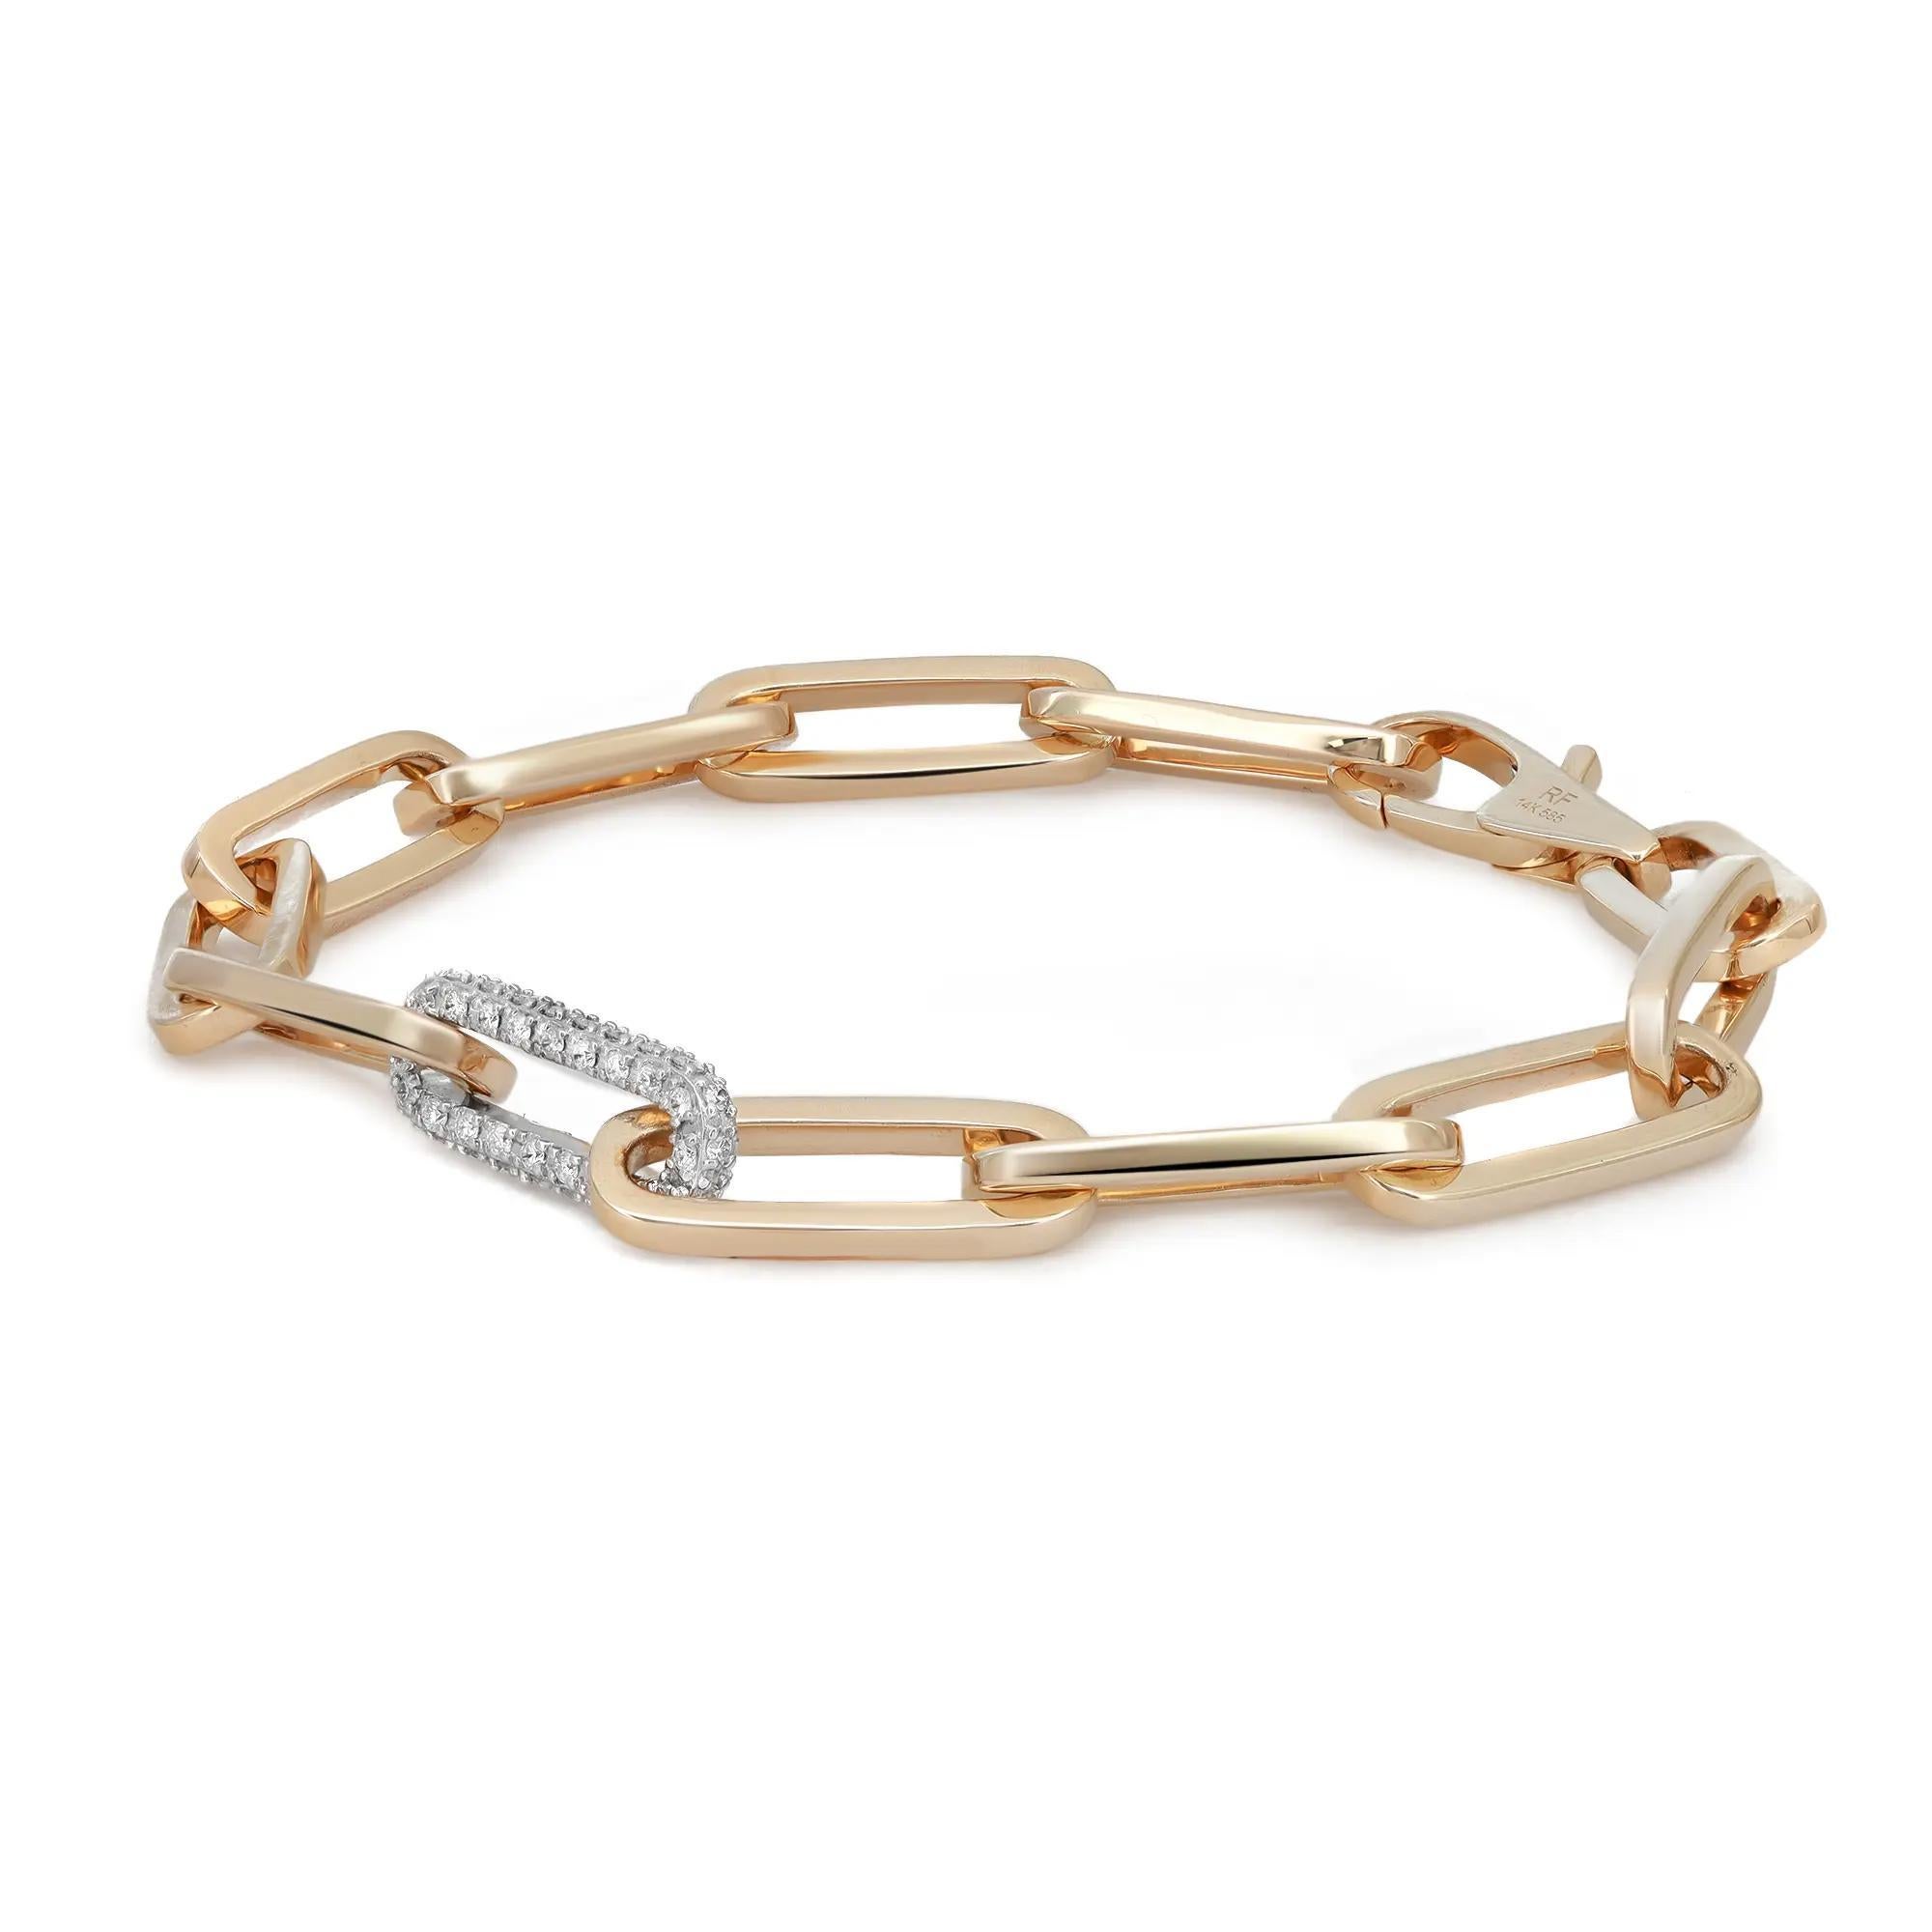 Rachel Koen Daimond paperclip link chain bracelet crafted in 14K yellow gold. This bracelet features 11 paperclip links with 1 diamond paperclip link in the center. Total diamond weight: 0.45 carat. Diamond color G-H and clarity VS-SI. Super